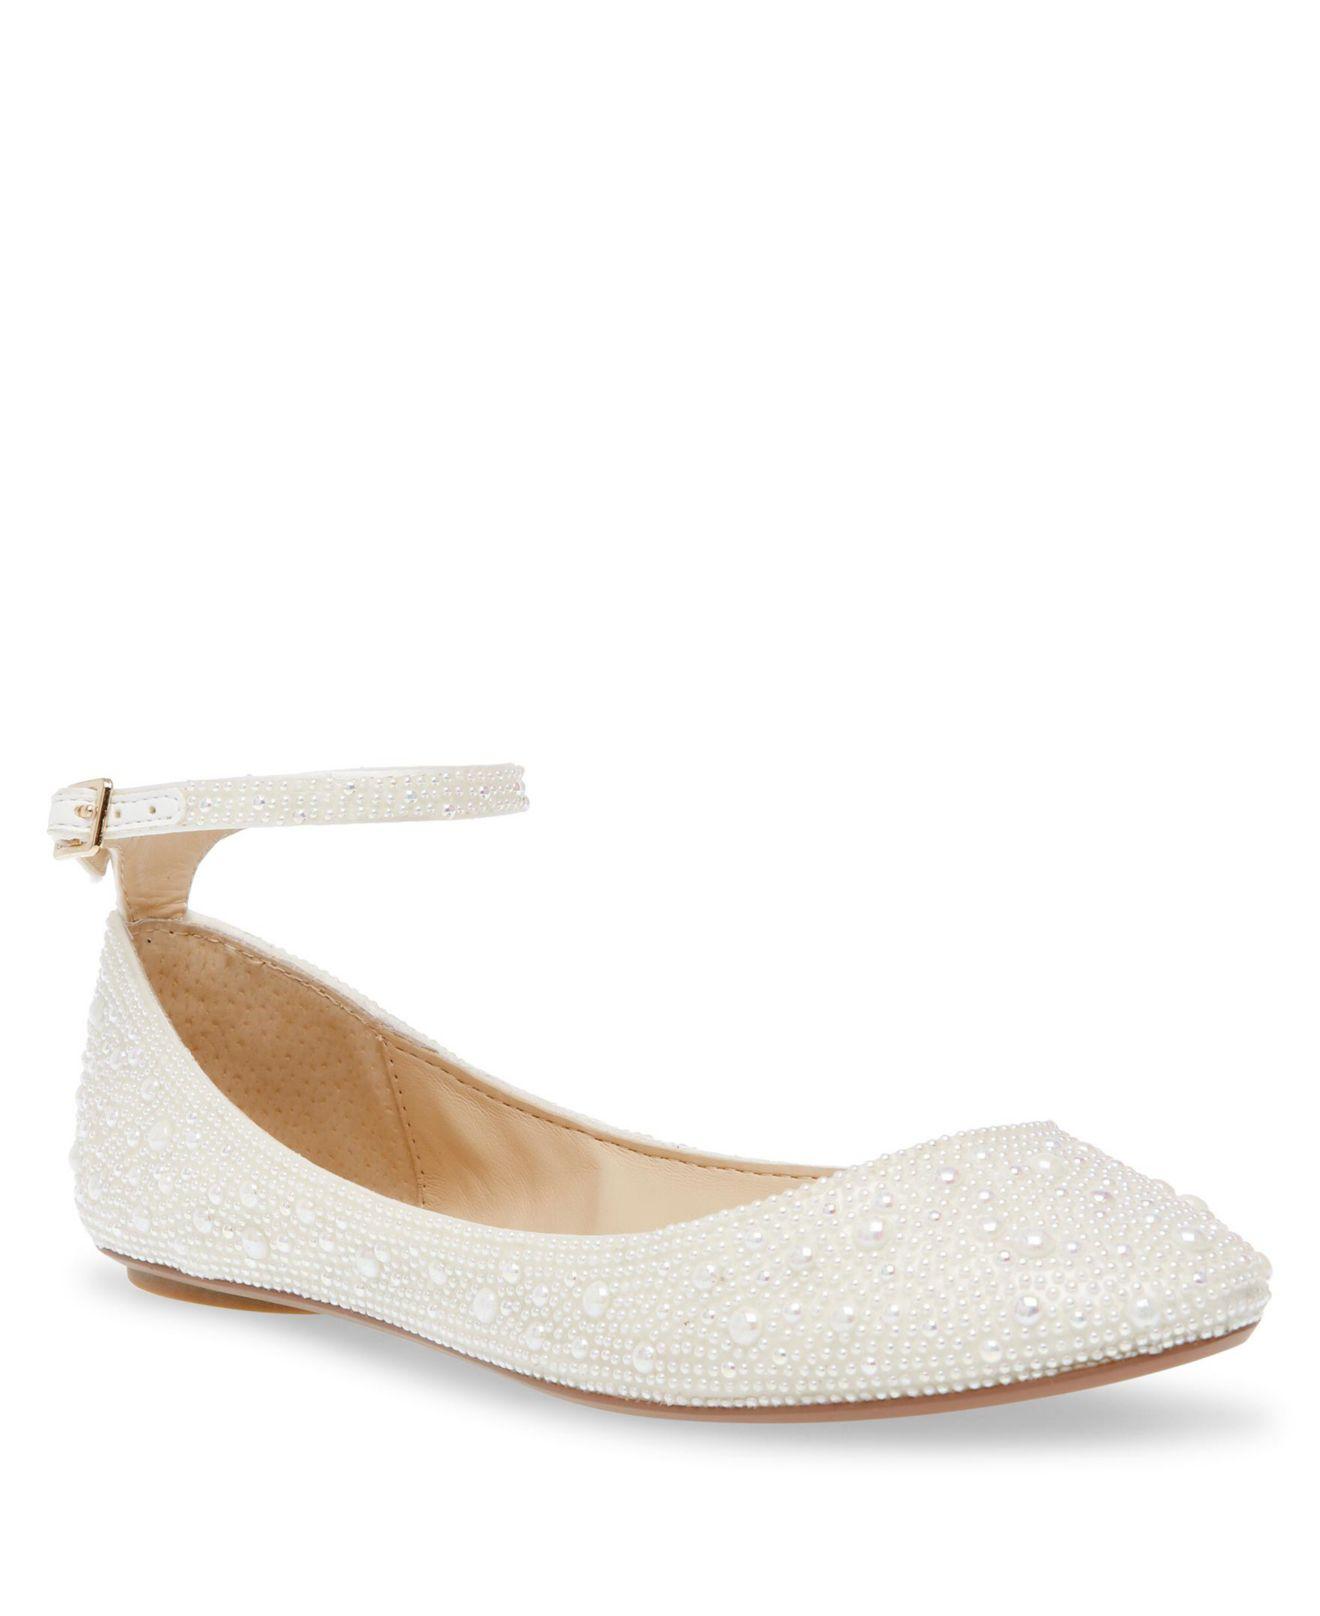 Betsey Johnson Ace Ballet Evening Flat in White | Lyst